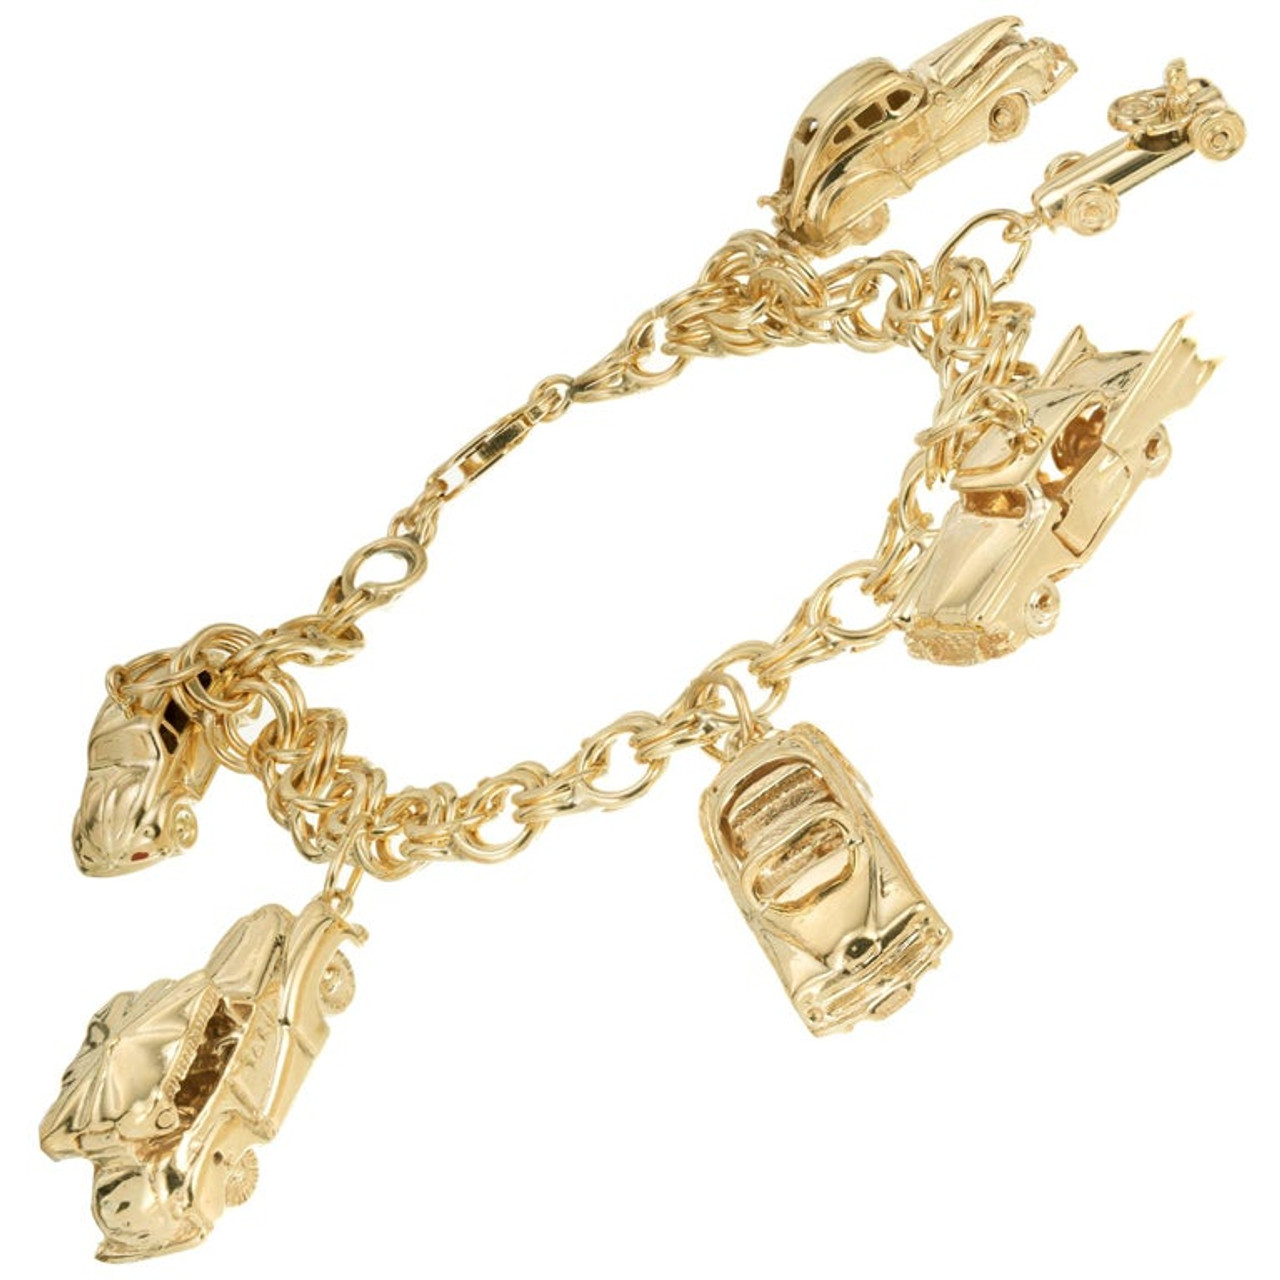 Solid Yellow Gold Double Spiral Link Charm Bracelet